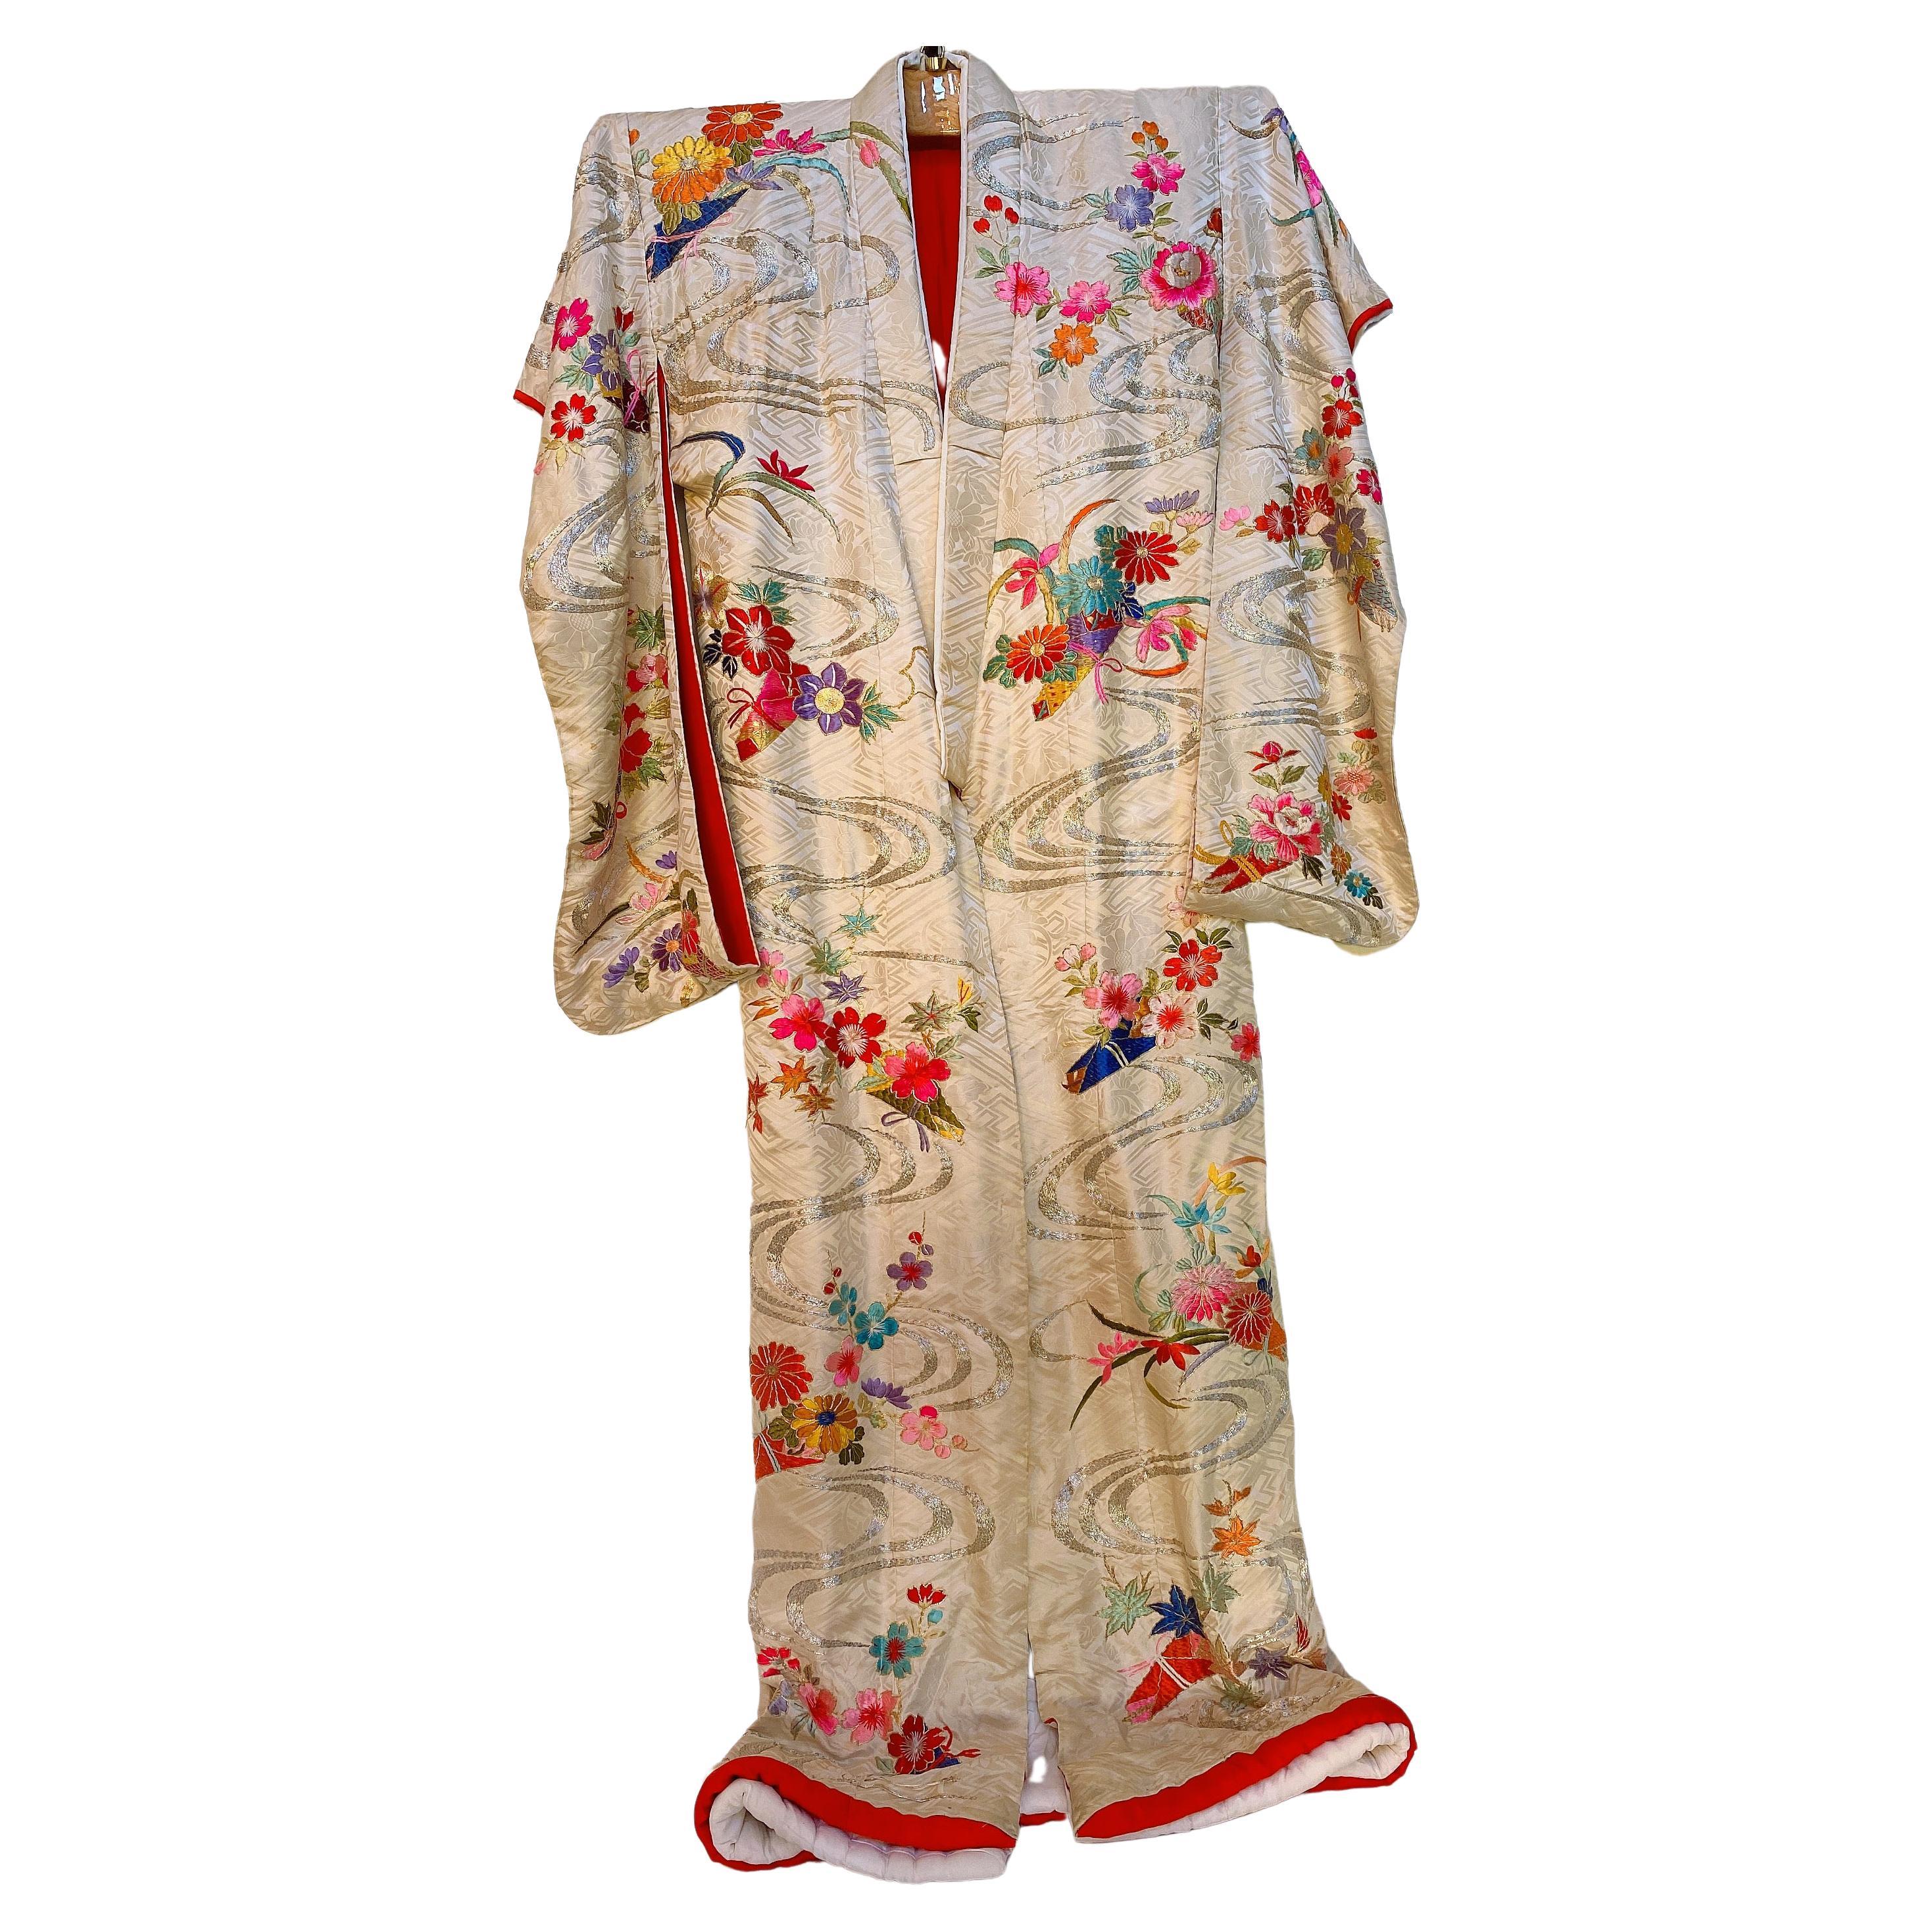 Rare Spectacular Hand-Embroidered Silk Japanese Kimono For Sale